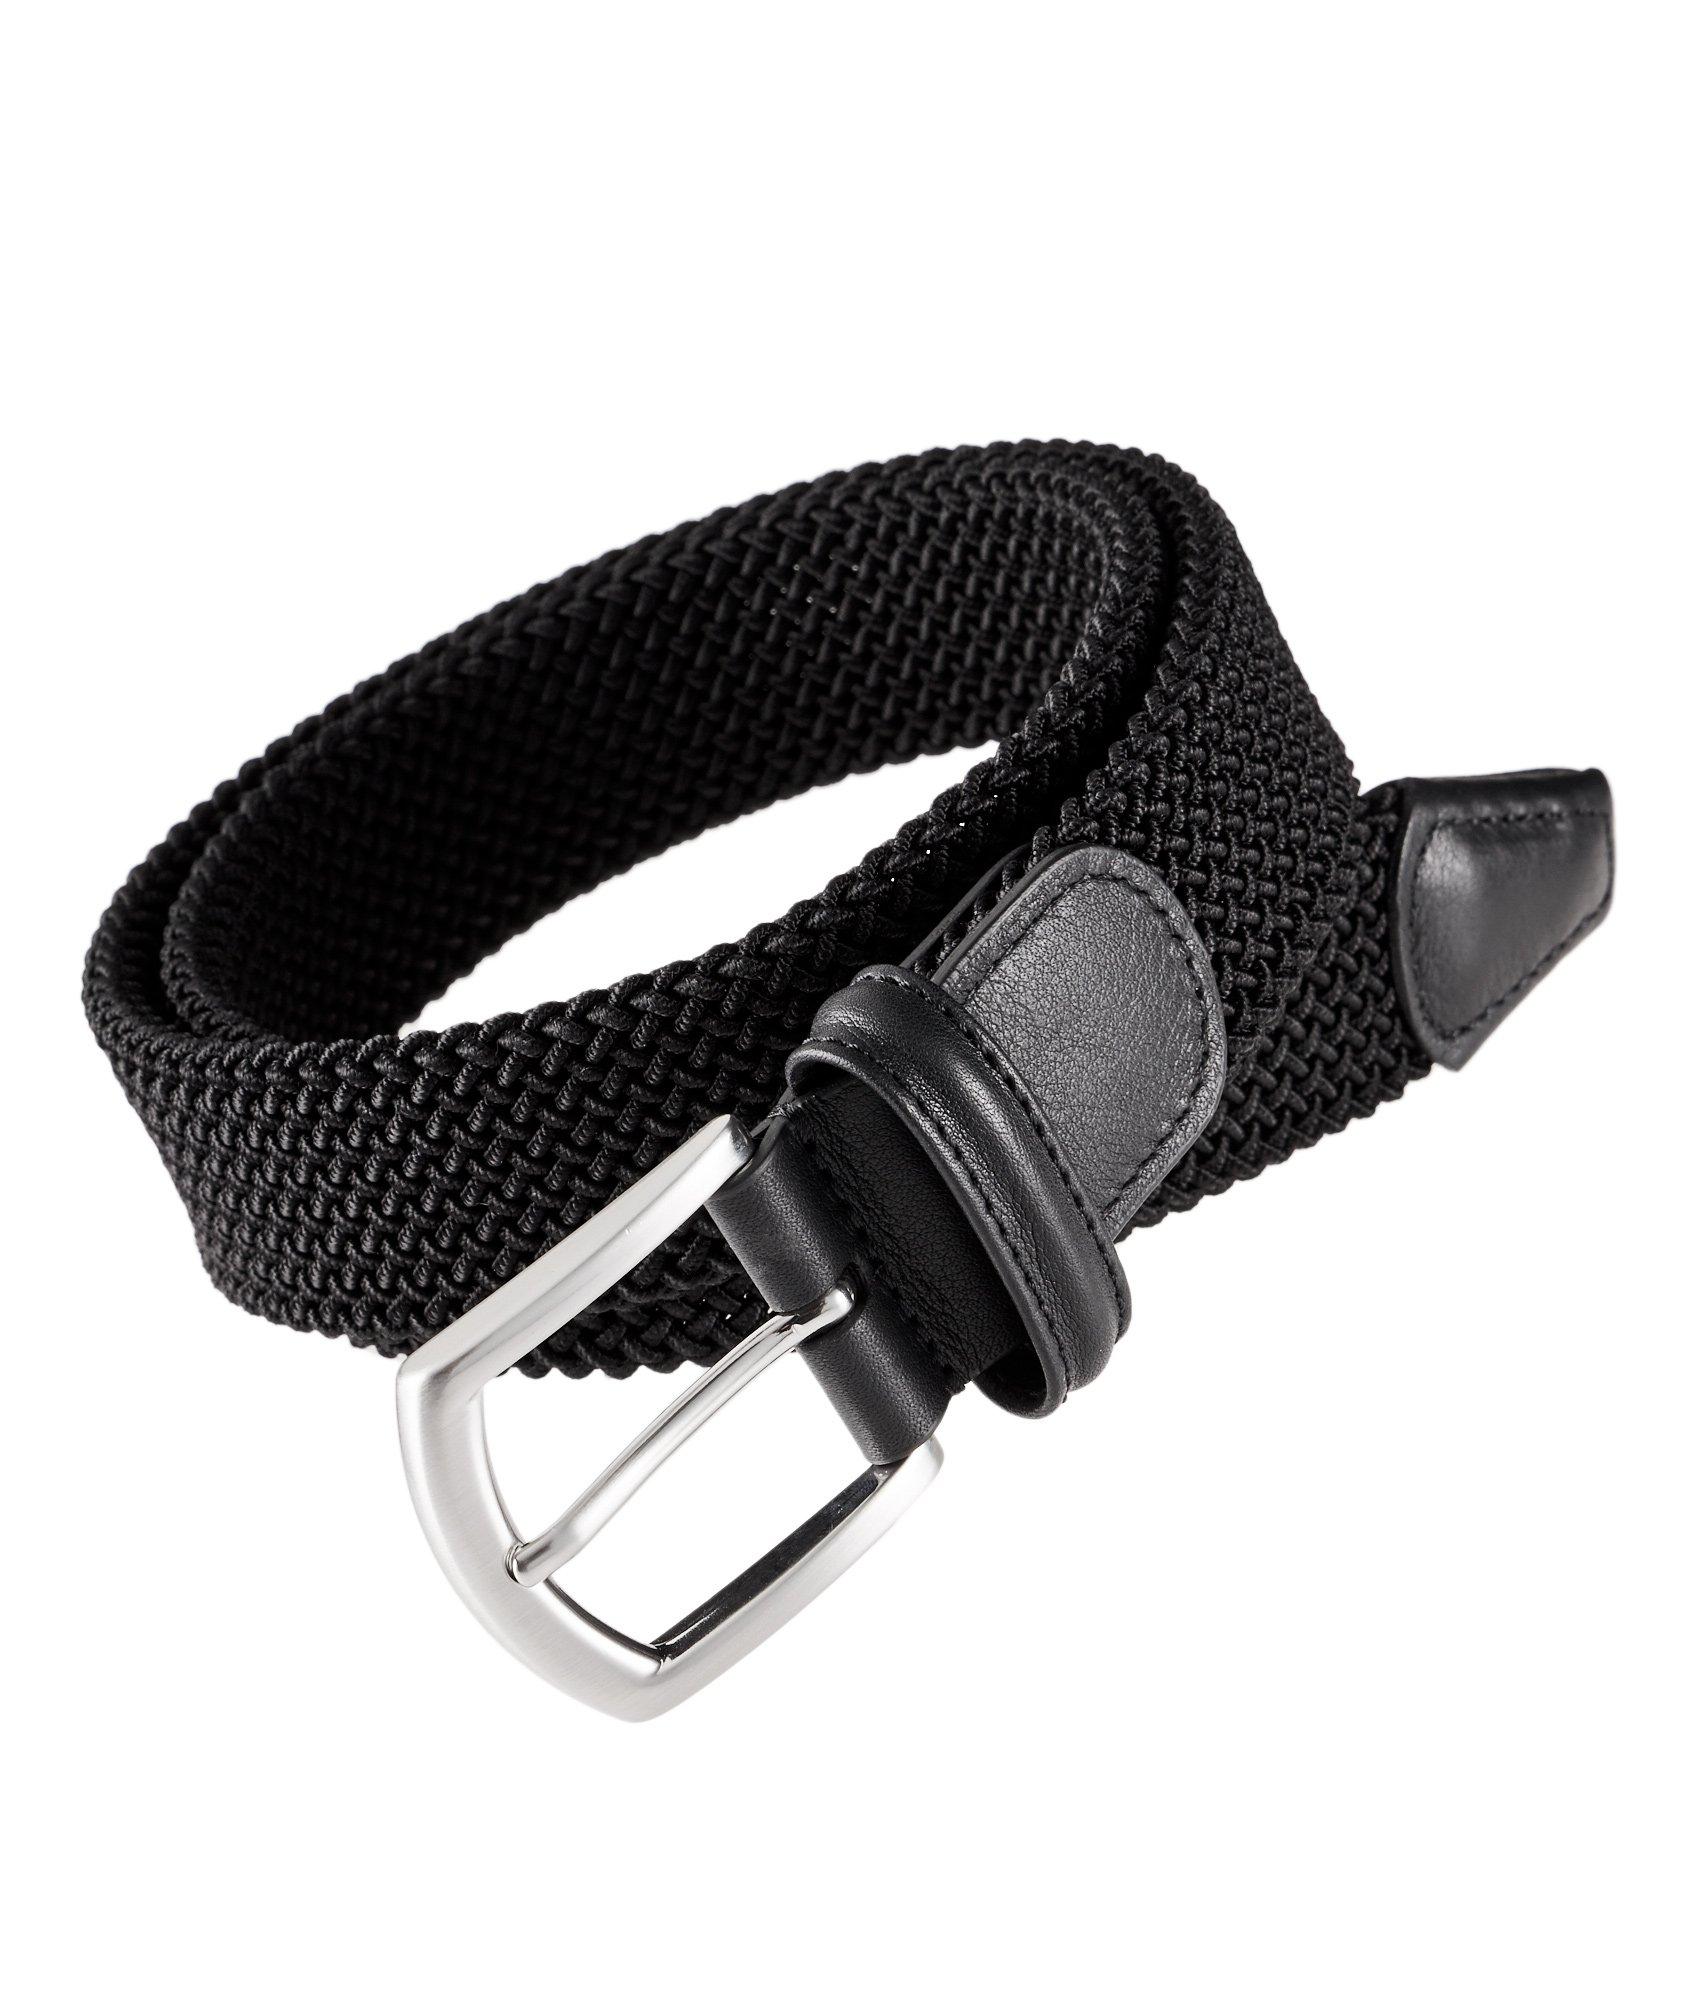 Anderson's Belts - Black Tubular Stretch Woven